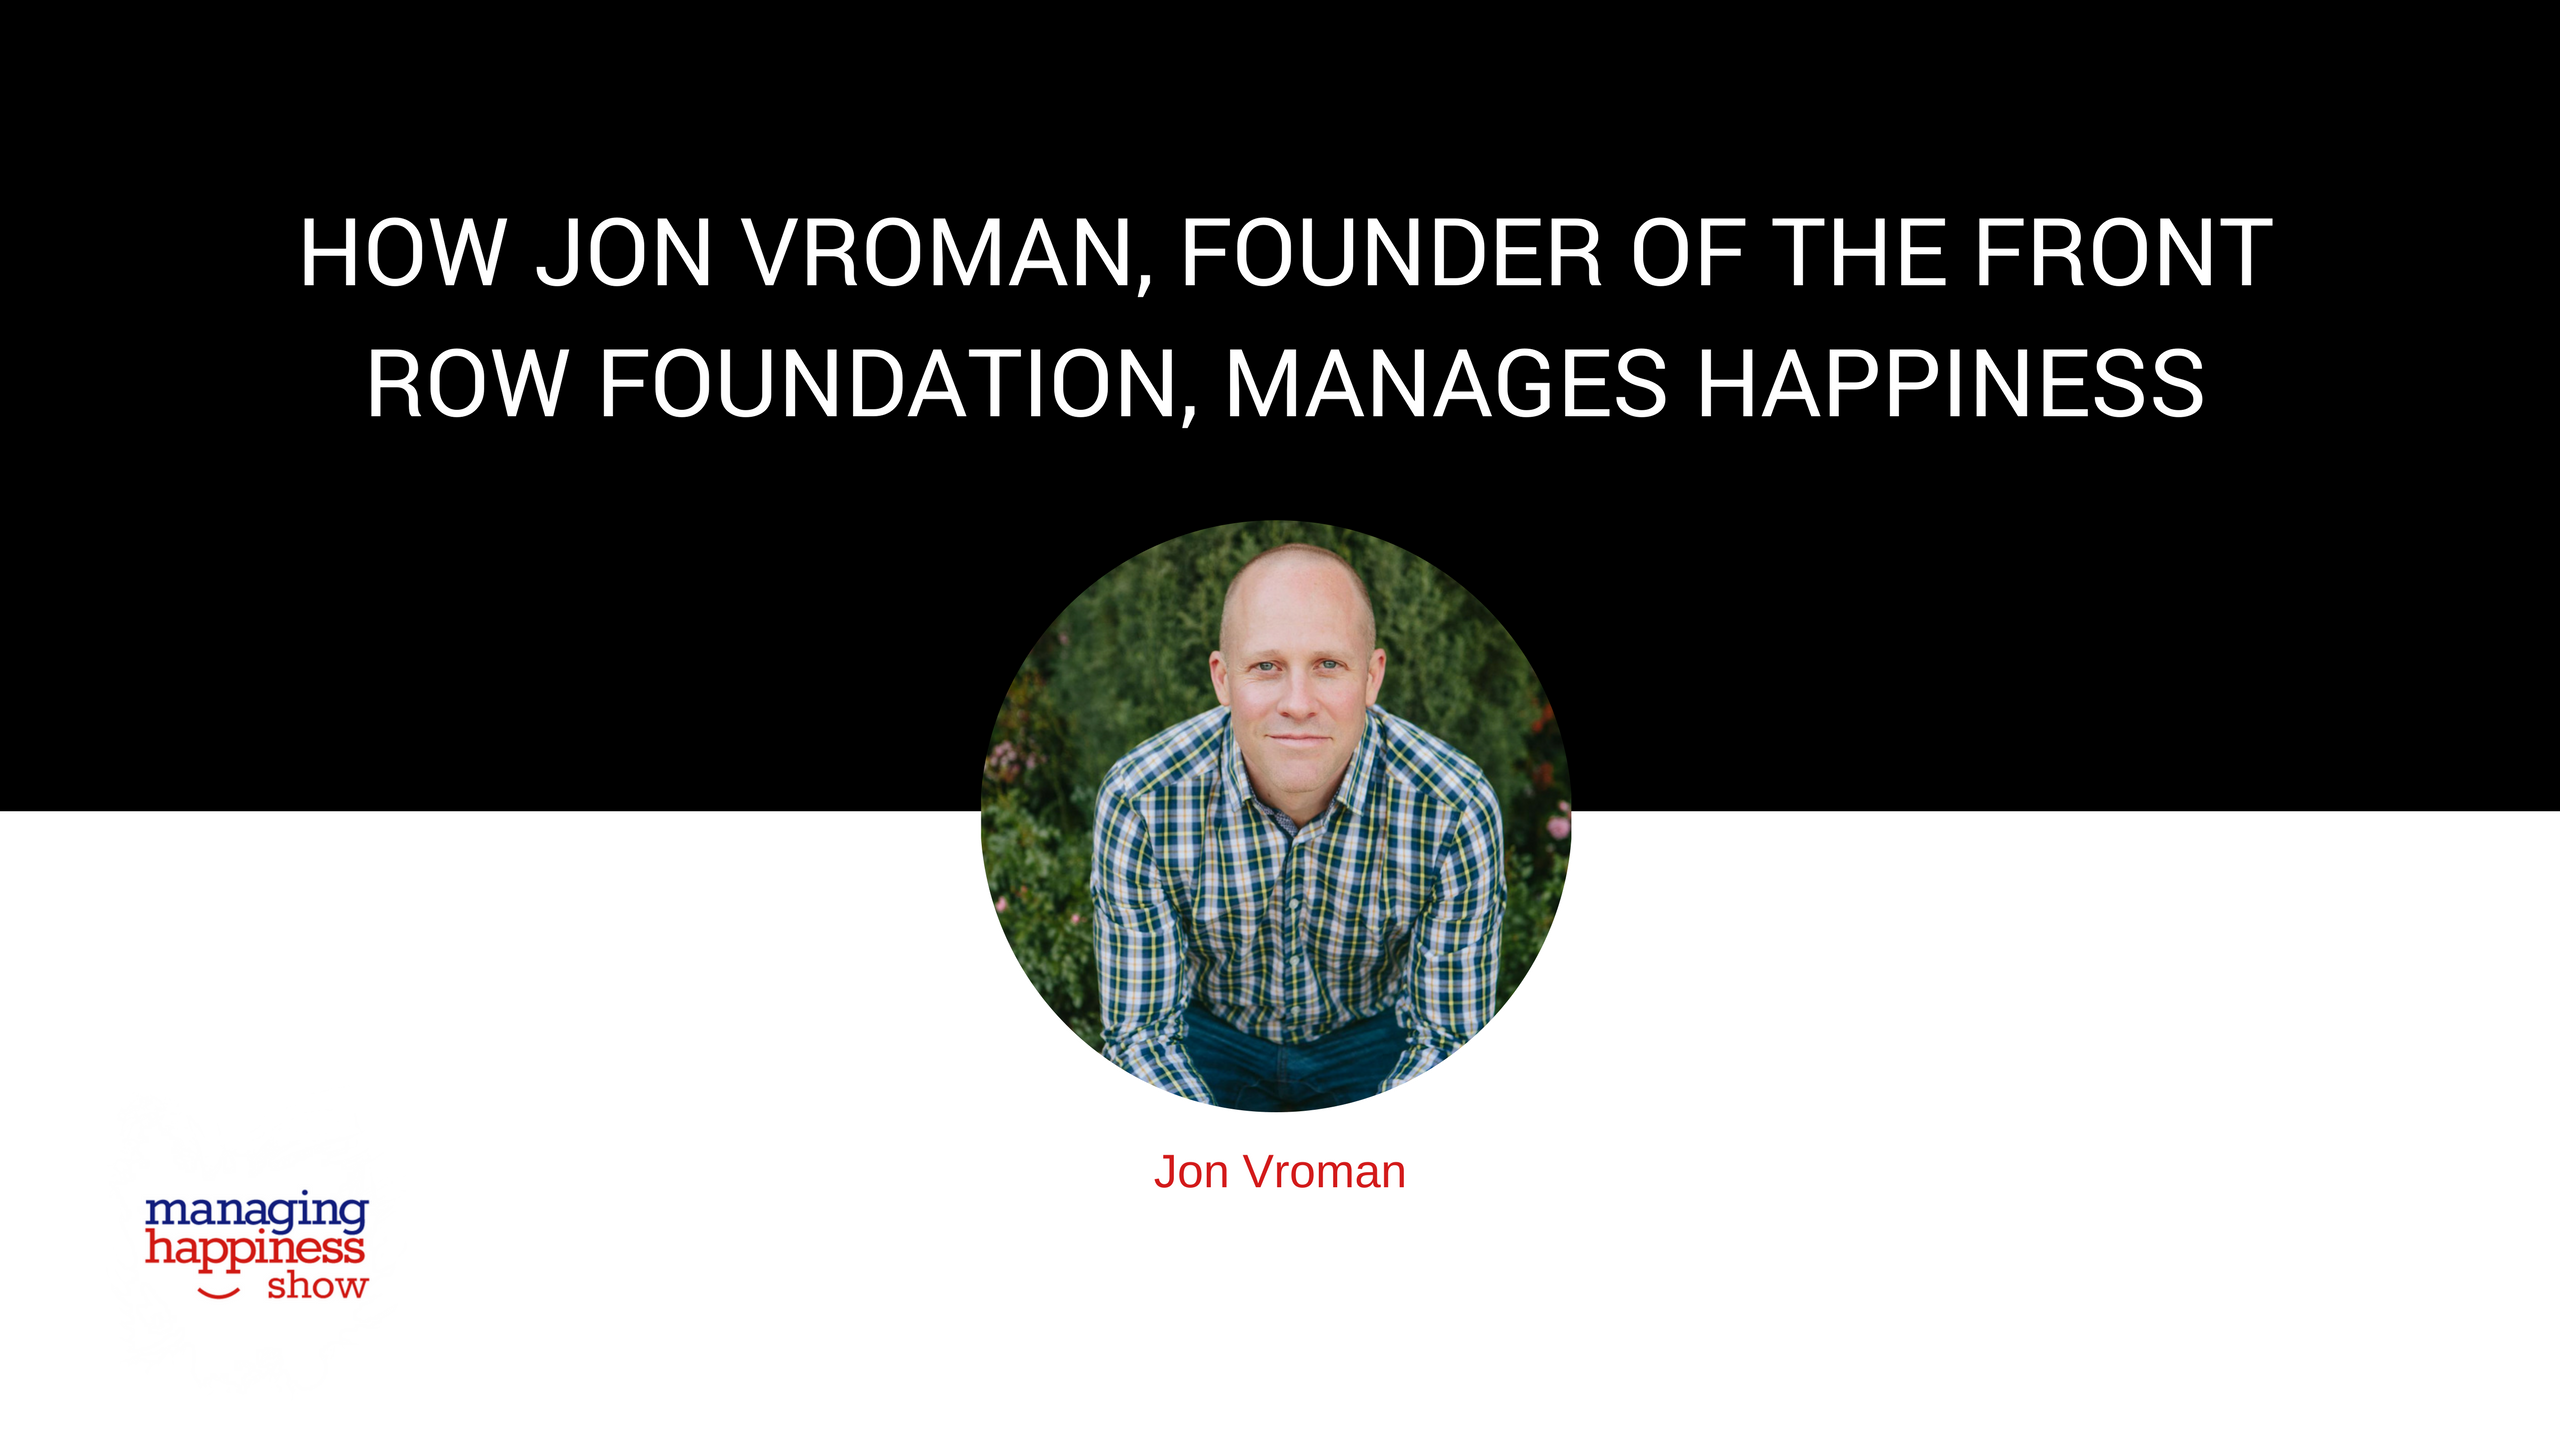 EP. 13: How Jon Vroman, Founder of the Front Row Foundation, is Managing Happiness